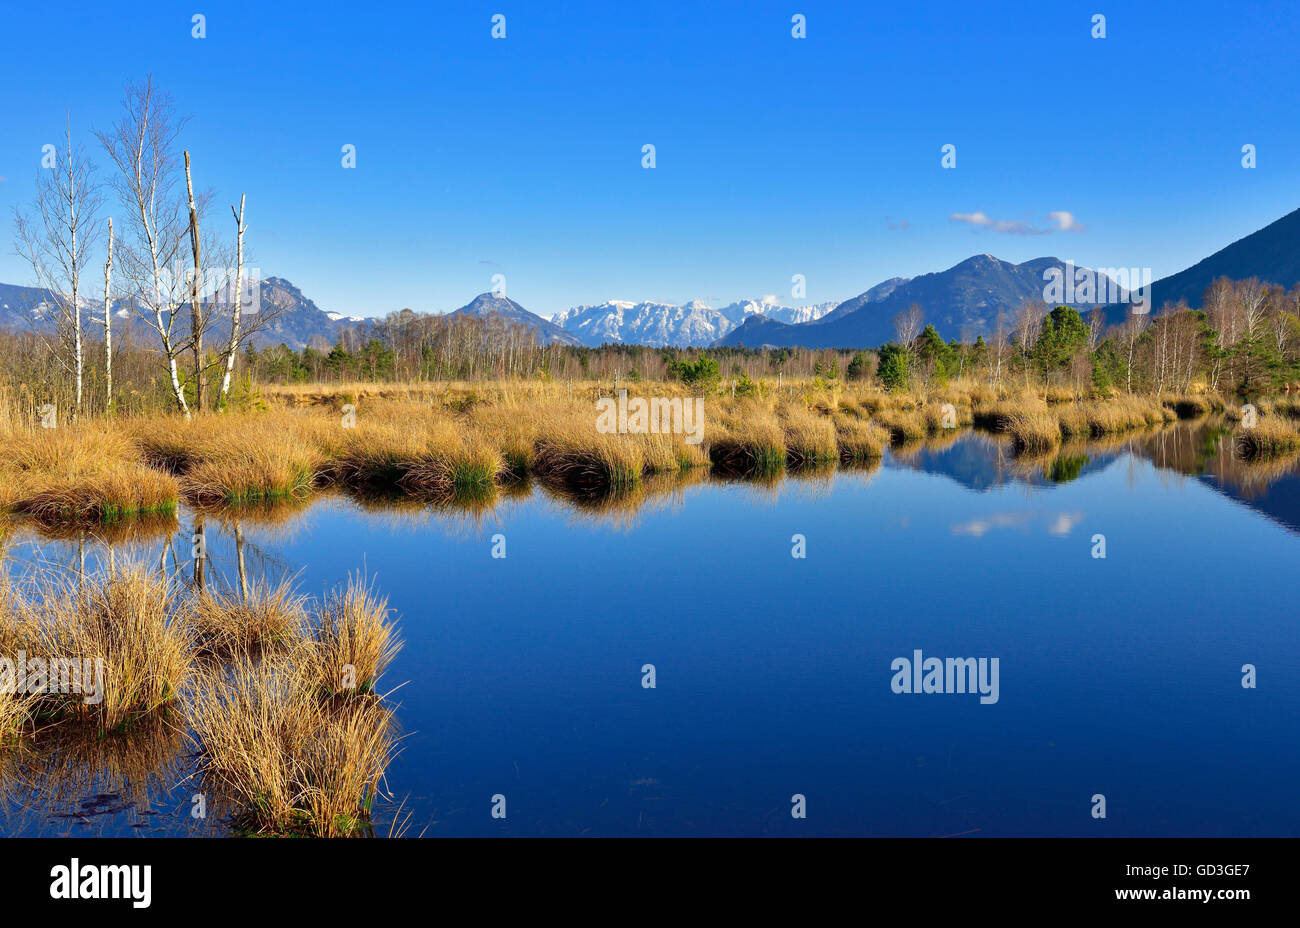 Moor pond, Grundbeckenmoor, Kaiser Mountains and Bavarian Alps in the background, Raubling, Alpine foothills, Bavaria, Germany Stock Photo